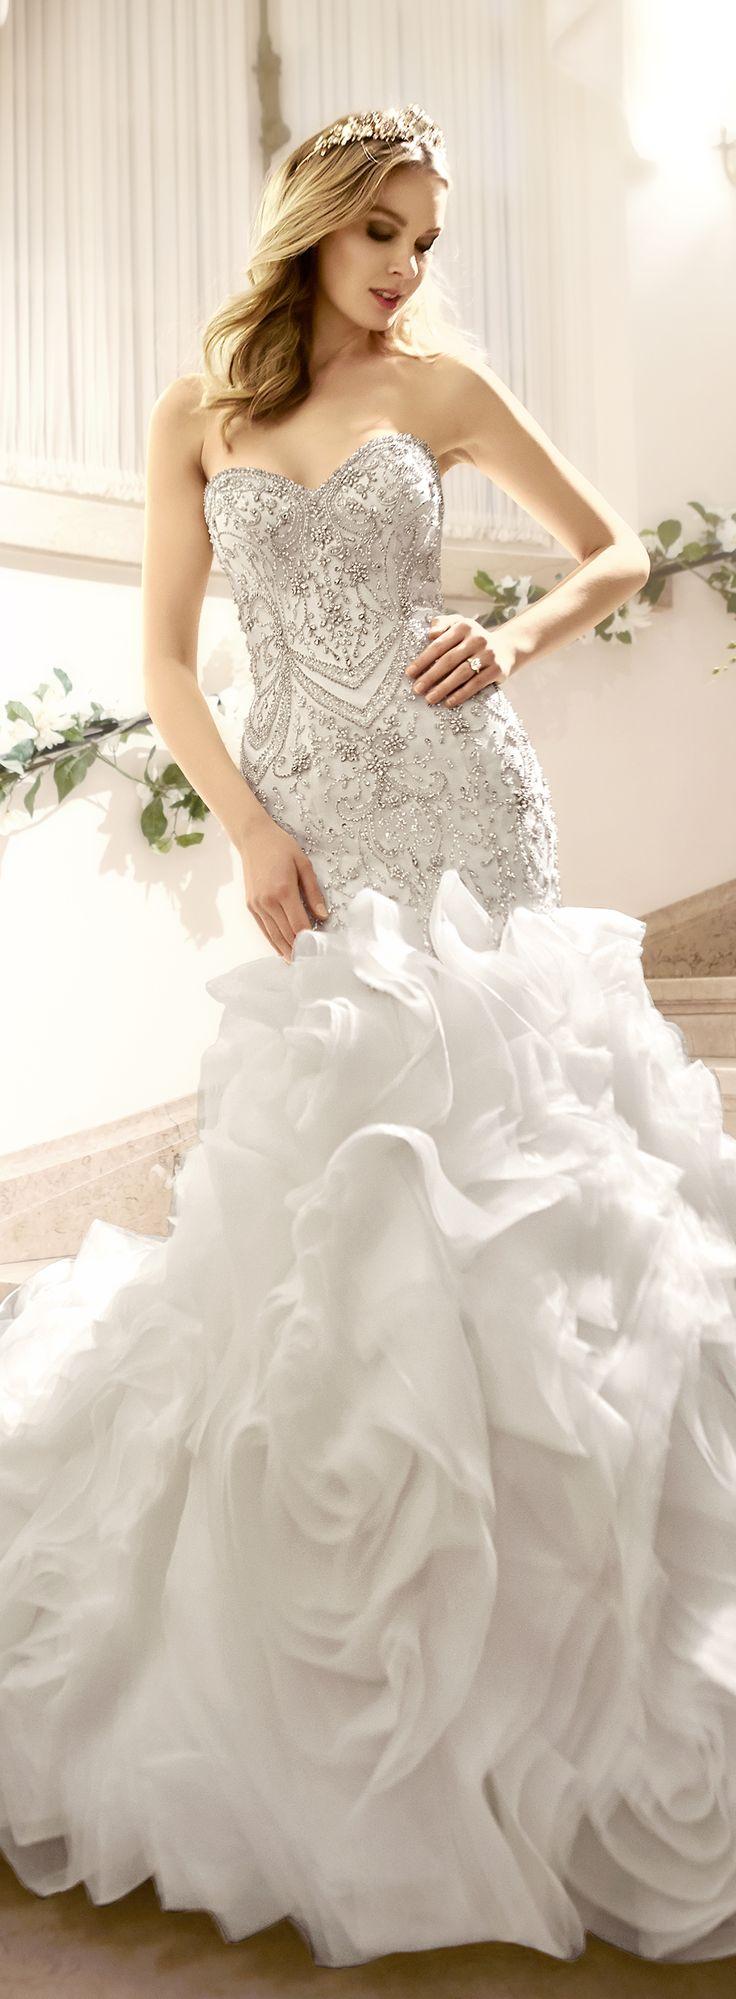 Mariage - Wedding Dress With Beaded Bodice And Textured Skirt 